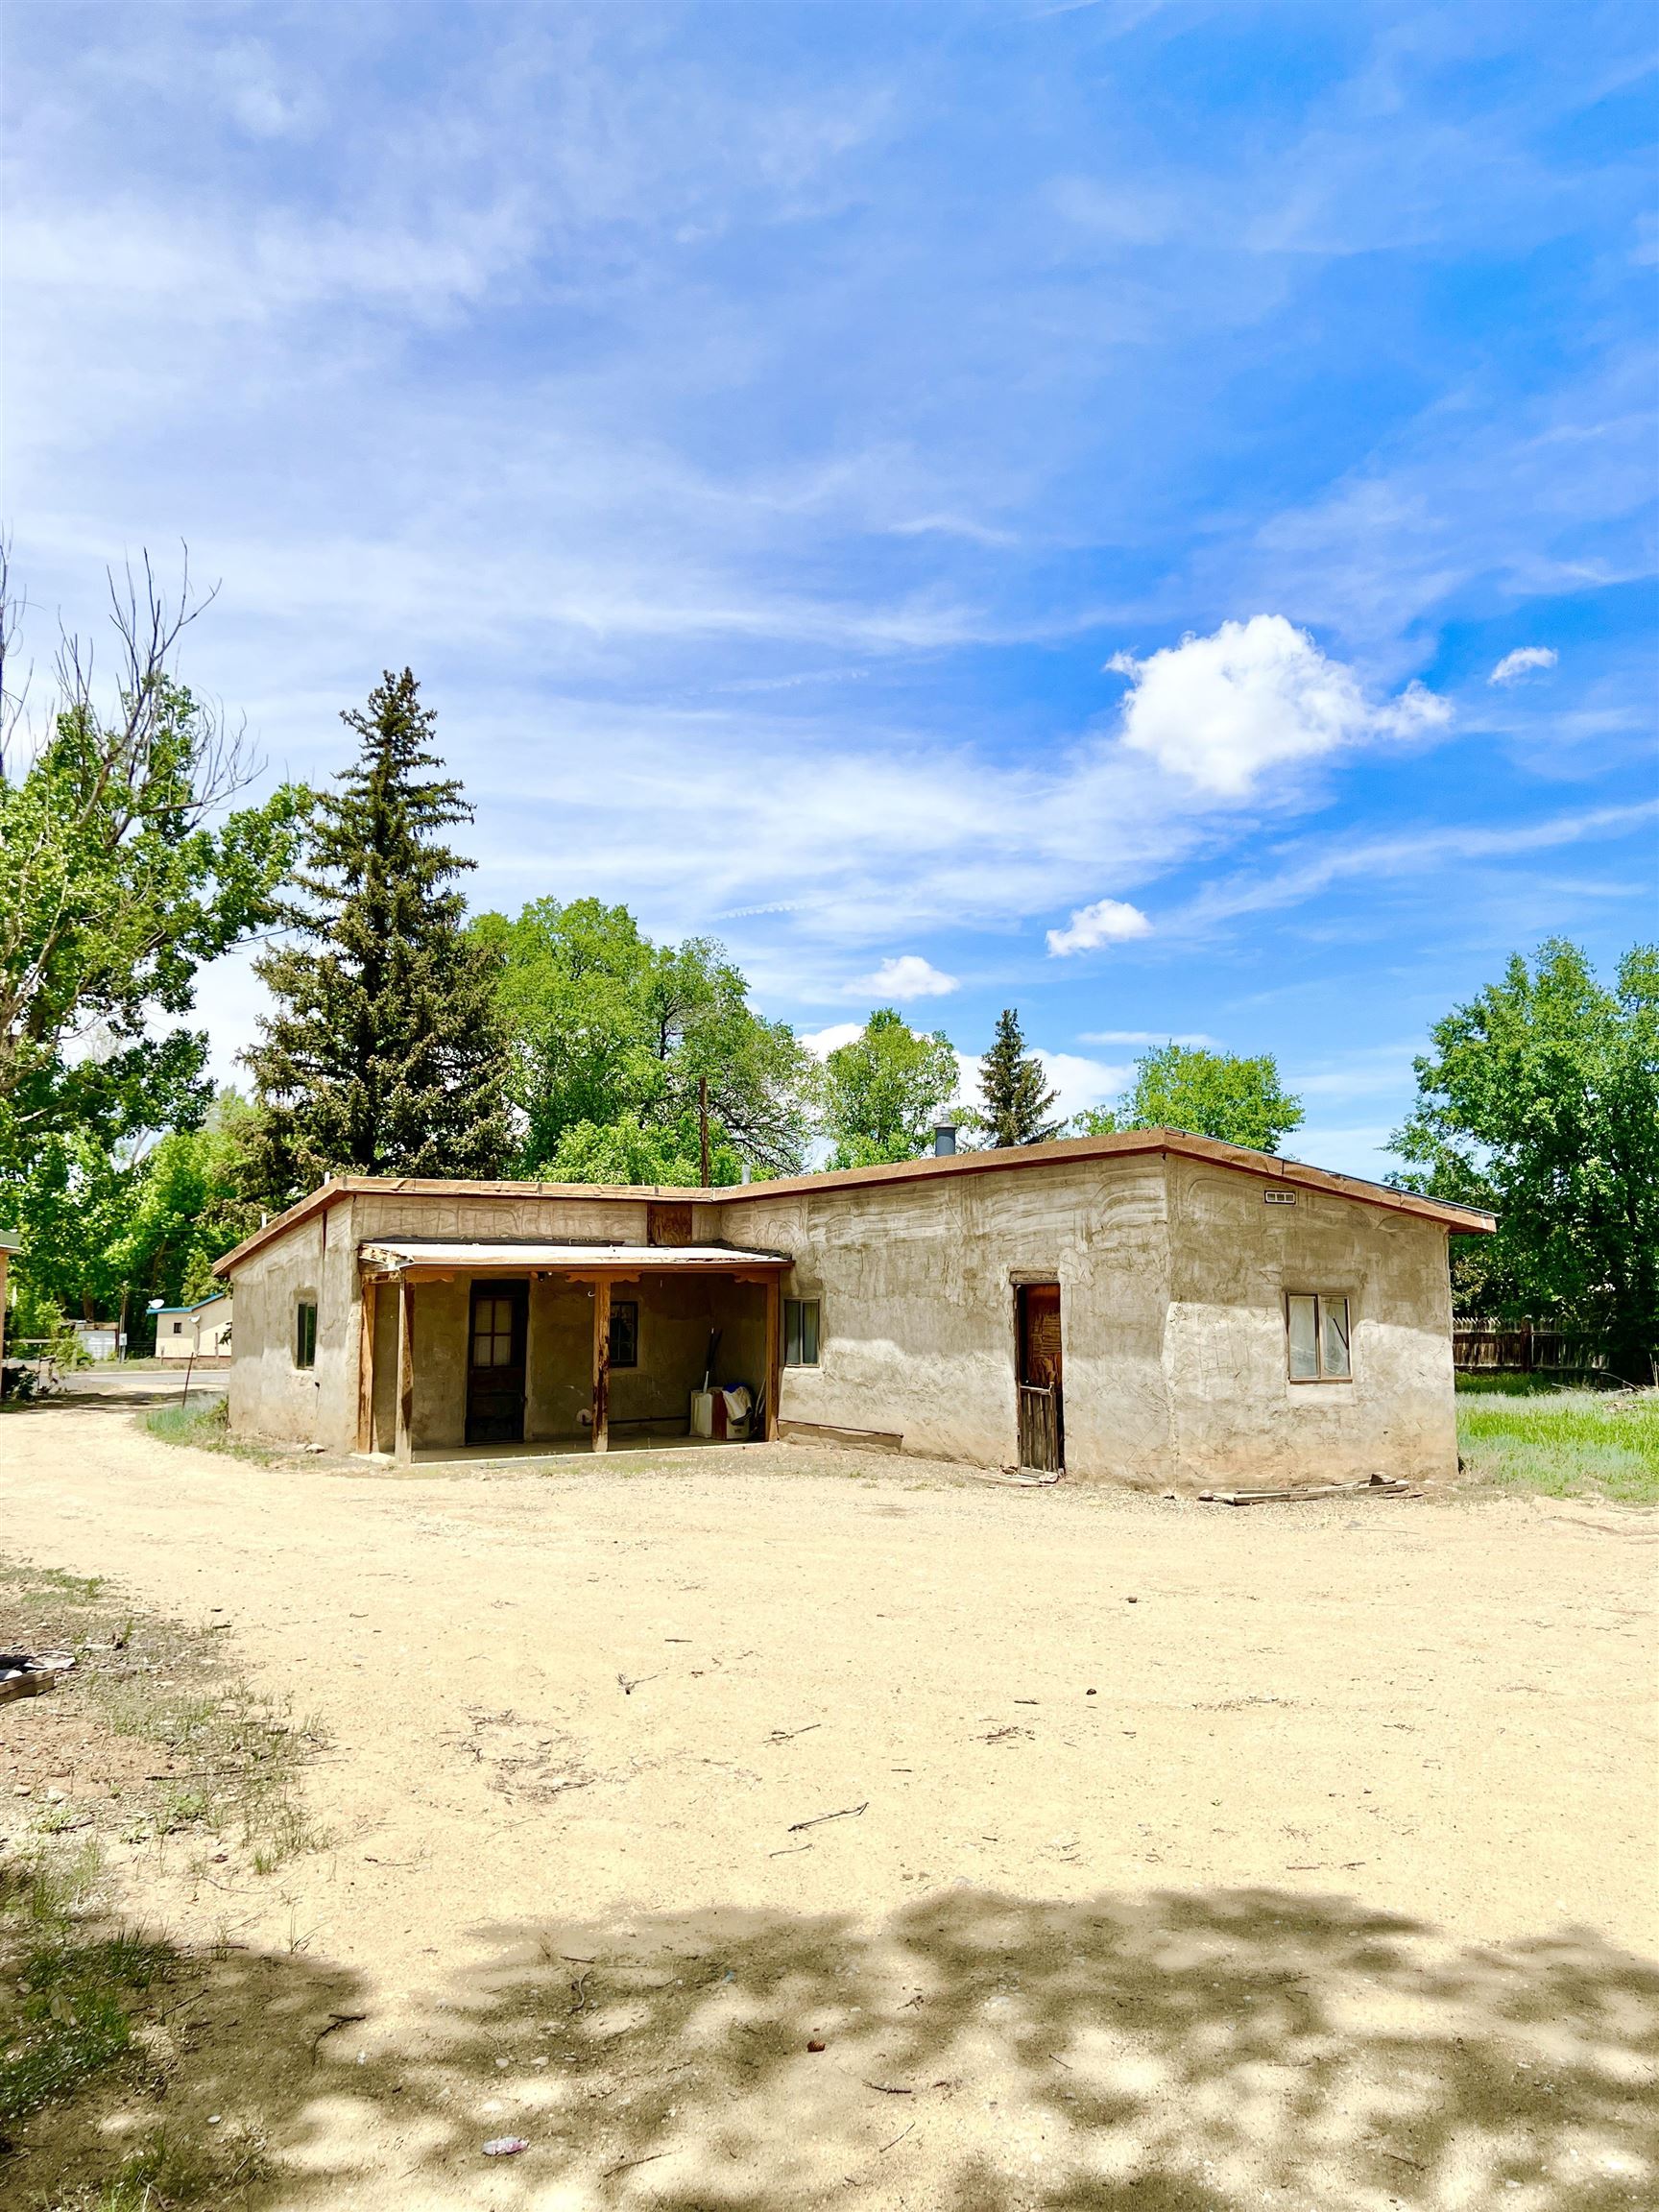 TOWN OF TAOS (45A)